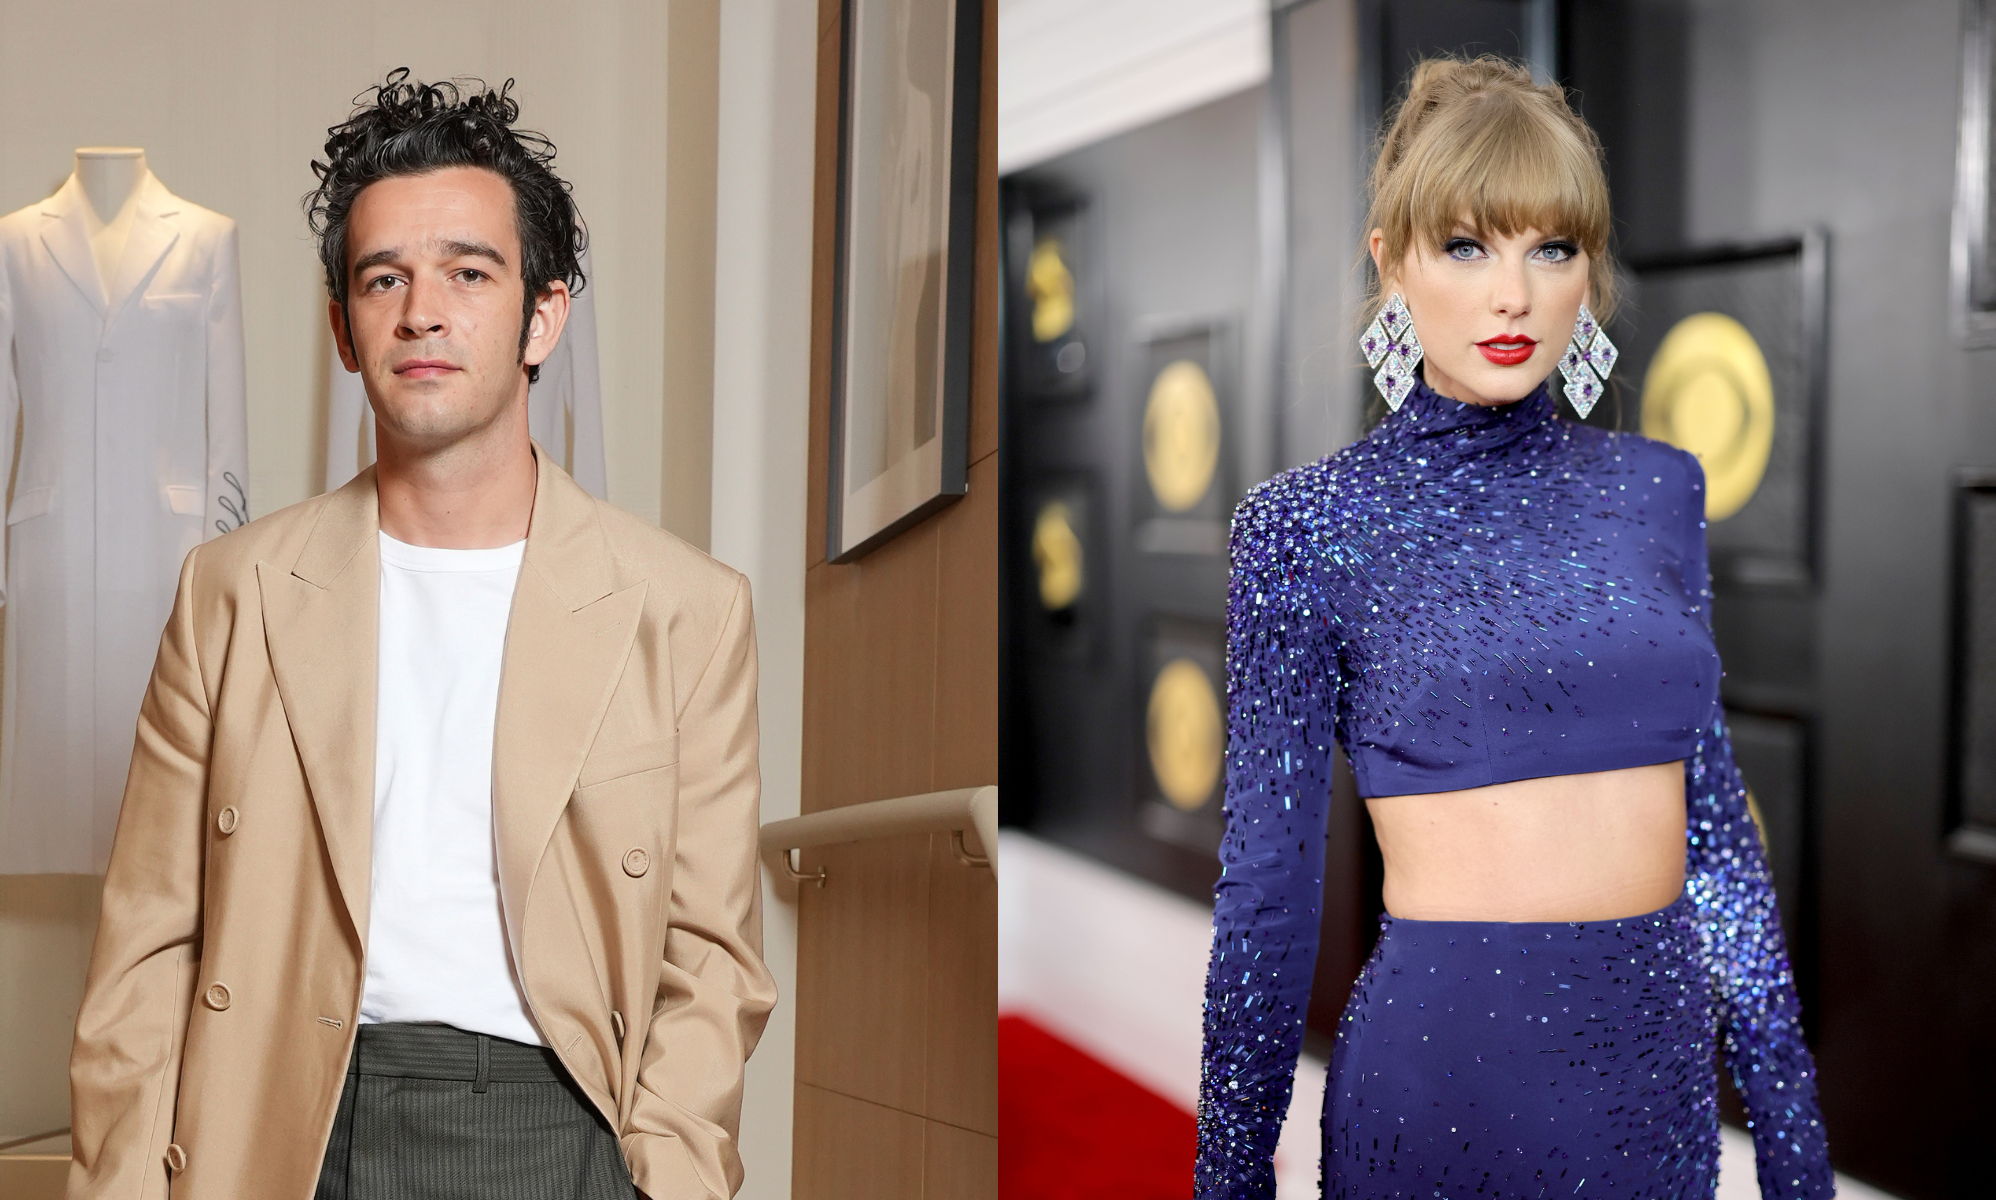 Matty Healy responds to Taylor Swift’s The Tortured Poets Department alleged ‘diss track’